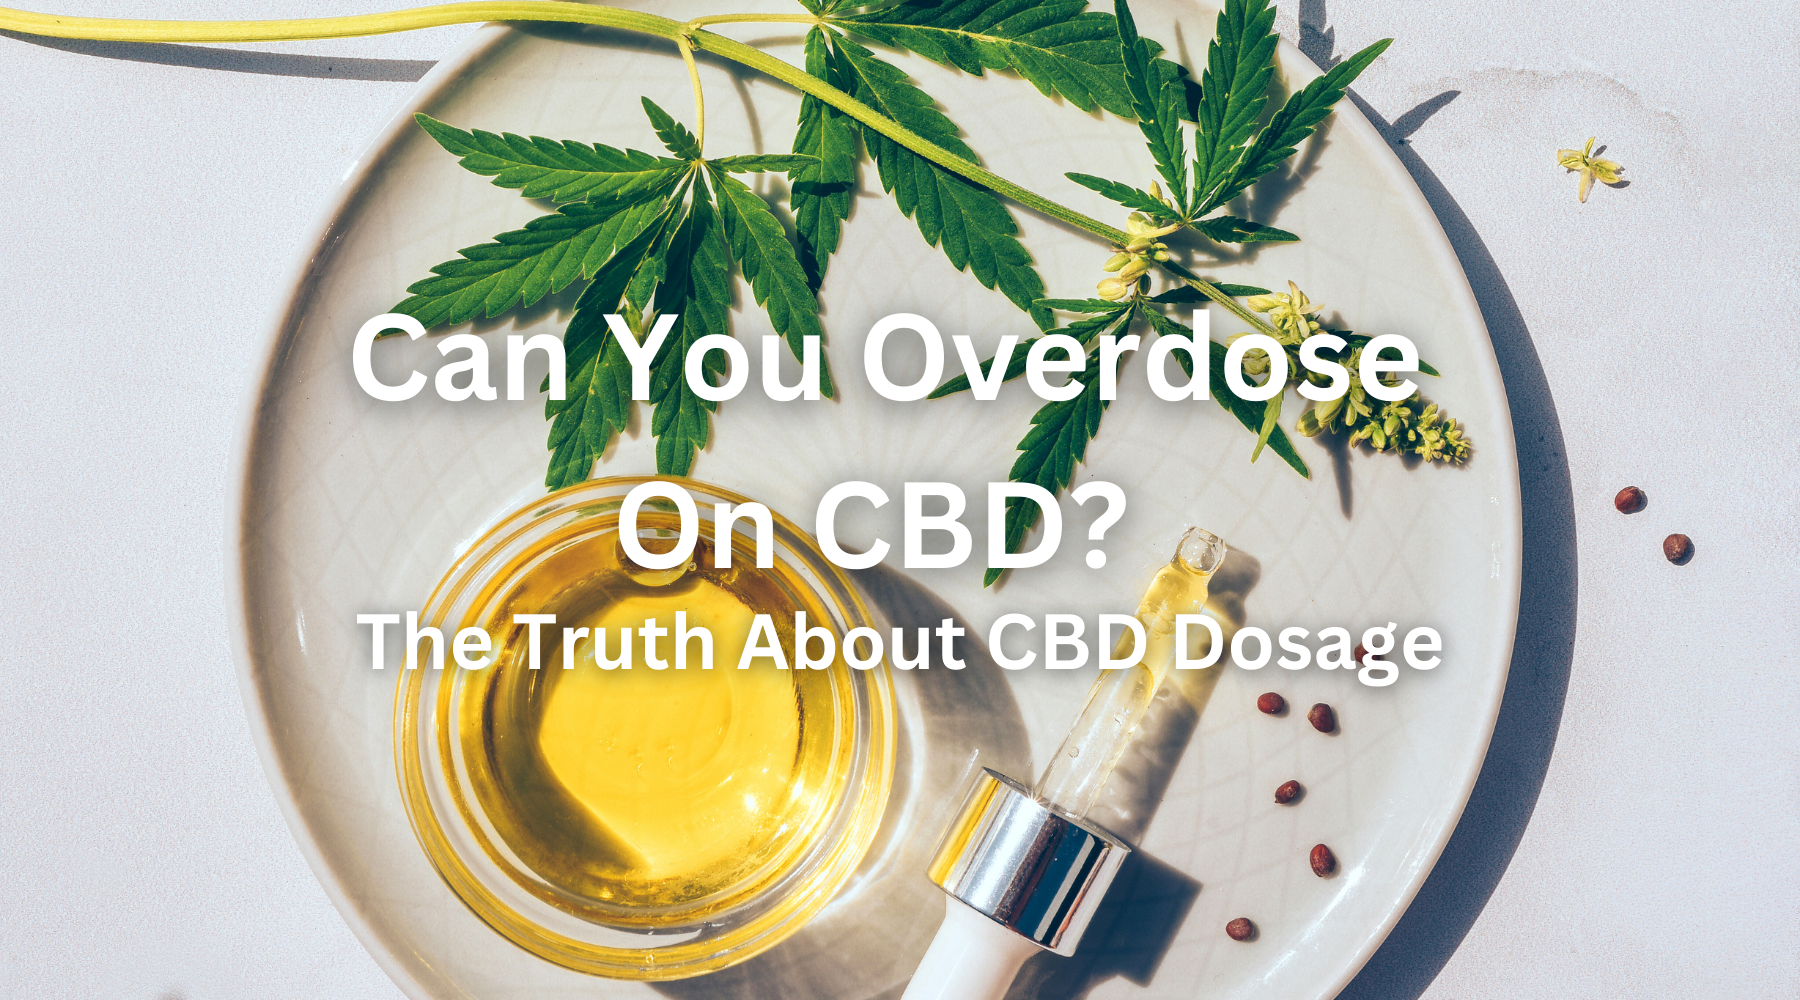 can you overdose on CBD? find out in this blog article.